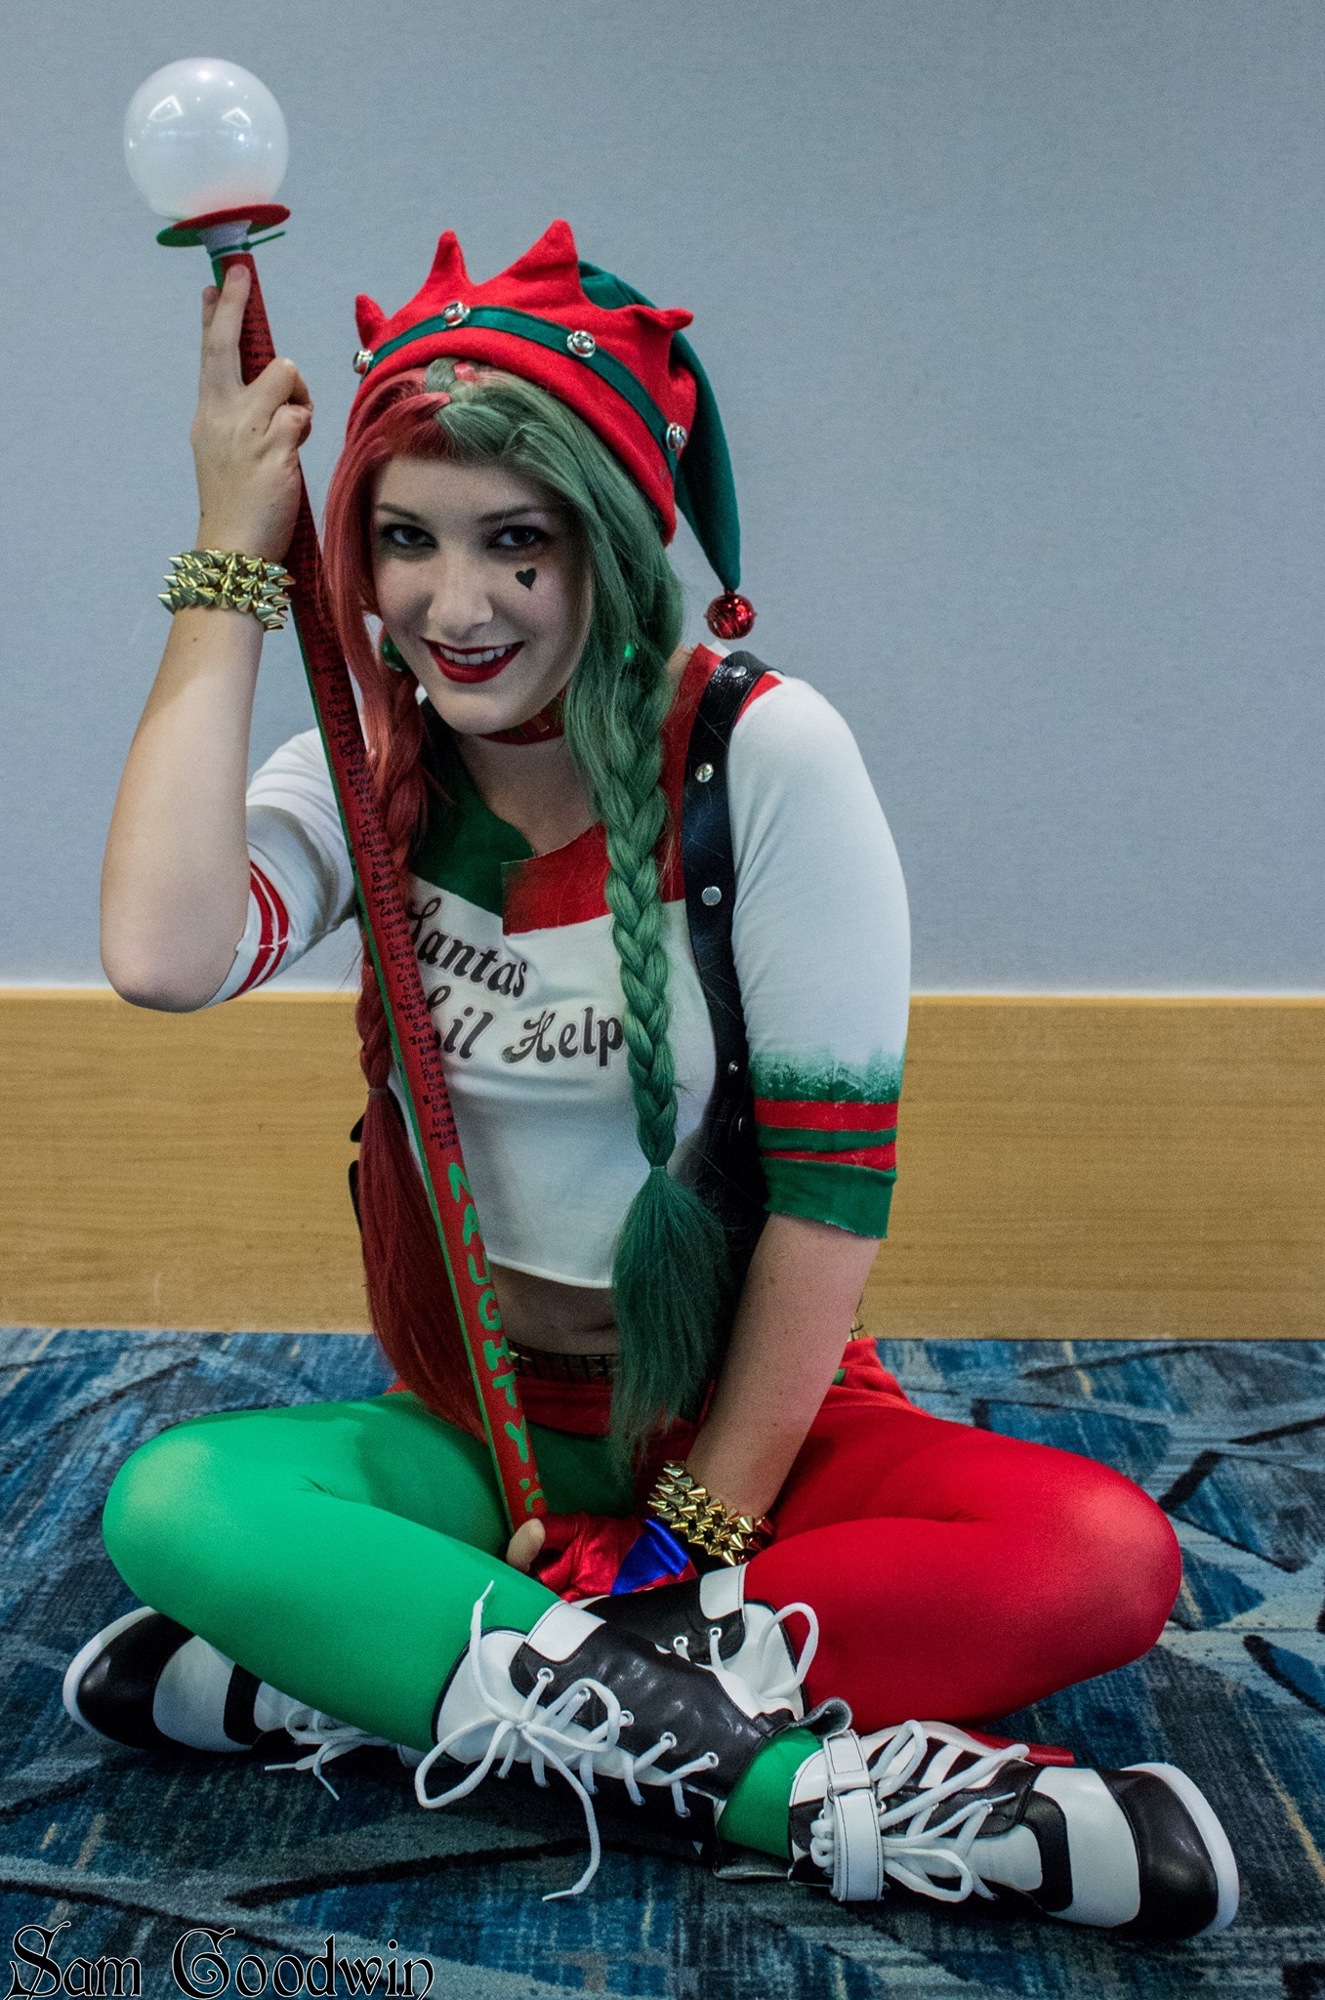  Rachel Bahr's favorite character to cosplay is Harley Quinn. (Courtesy of Sam Goodwin Photography)